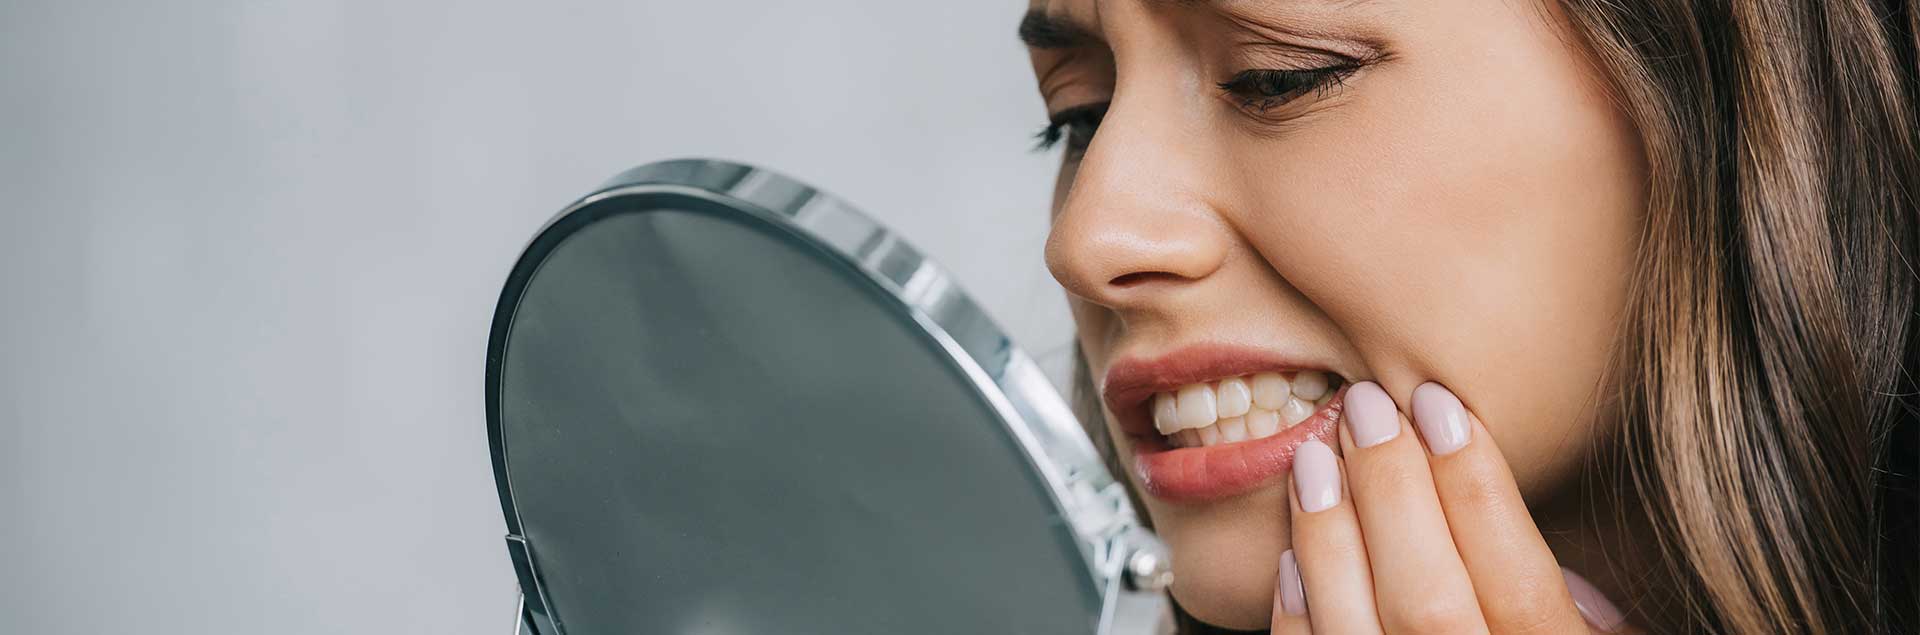 Close-up view of young woman having toothache and looking at mirror